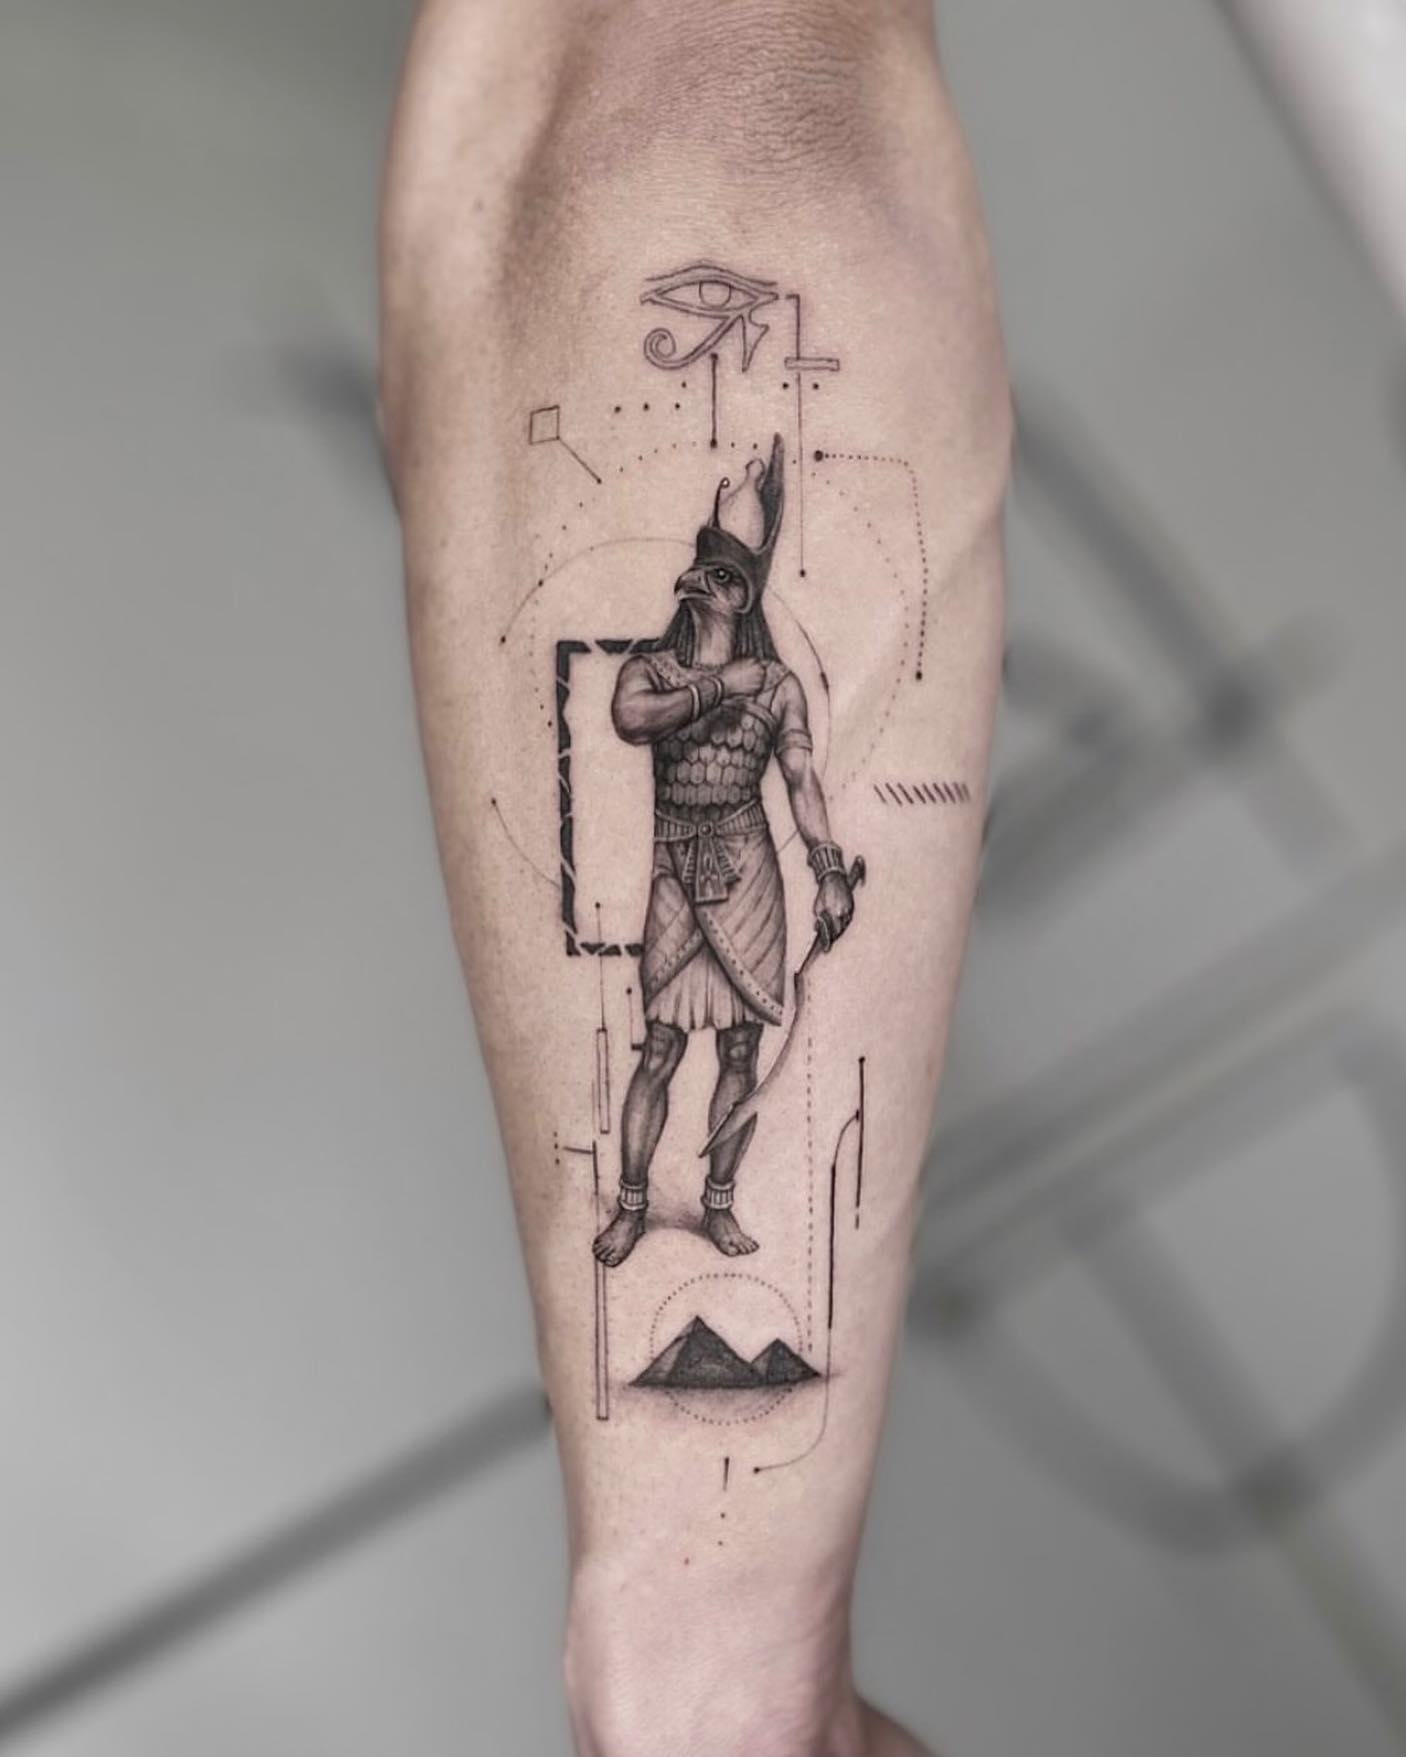 Horus is a deity that is depicted by a falcon-headed man. Go for this mythological tattoo.